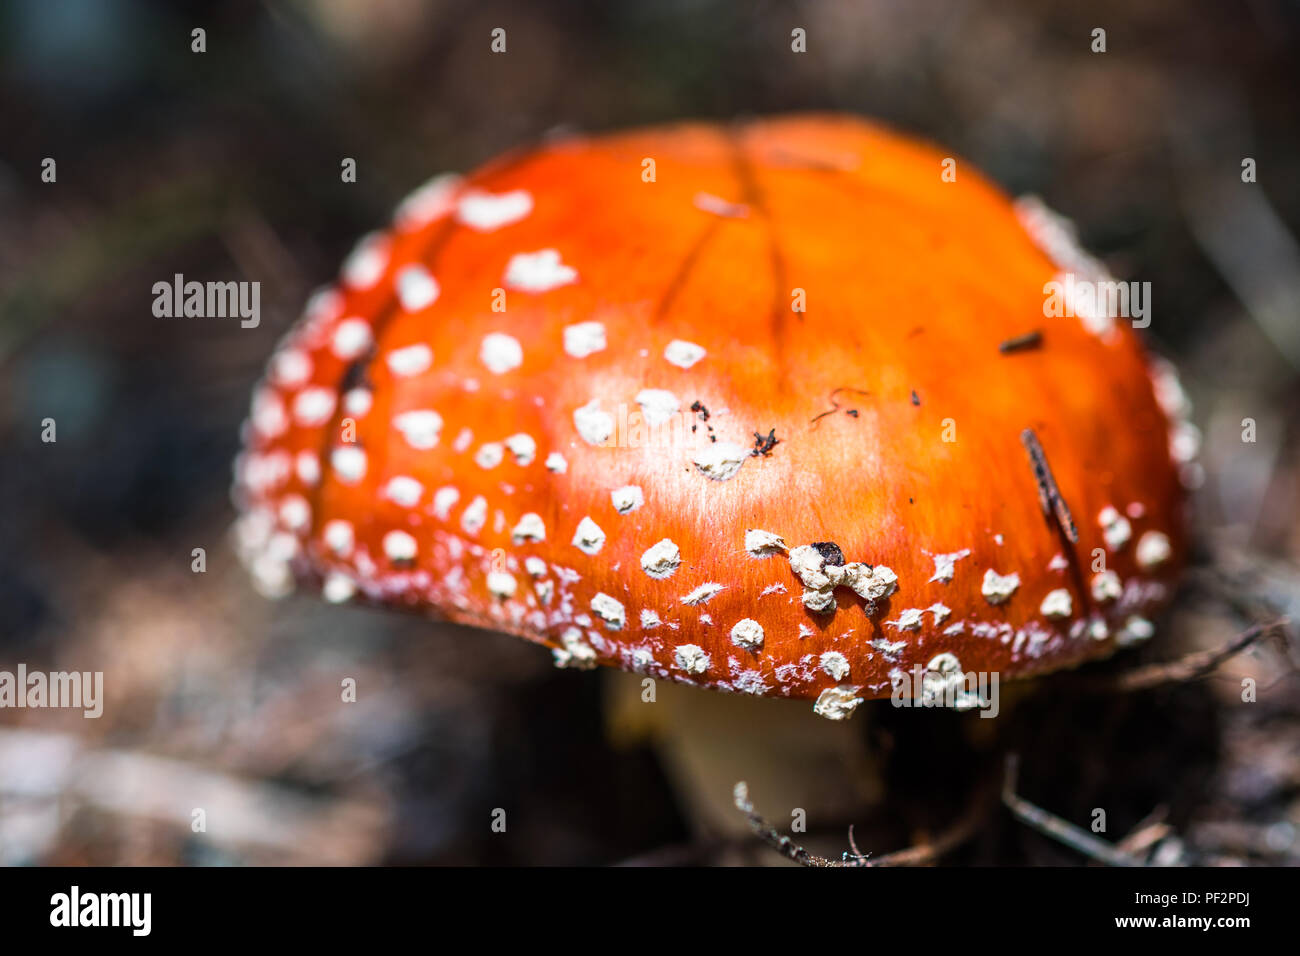 A beautiful but highly poisonous red mushroom with white points commonly known as fly agaric or fly amanita. Toadstool in a forest. Also known as Aman Stock Photo